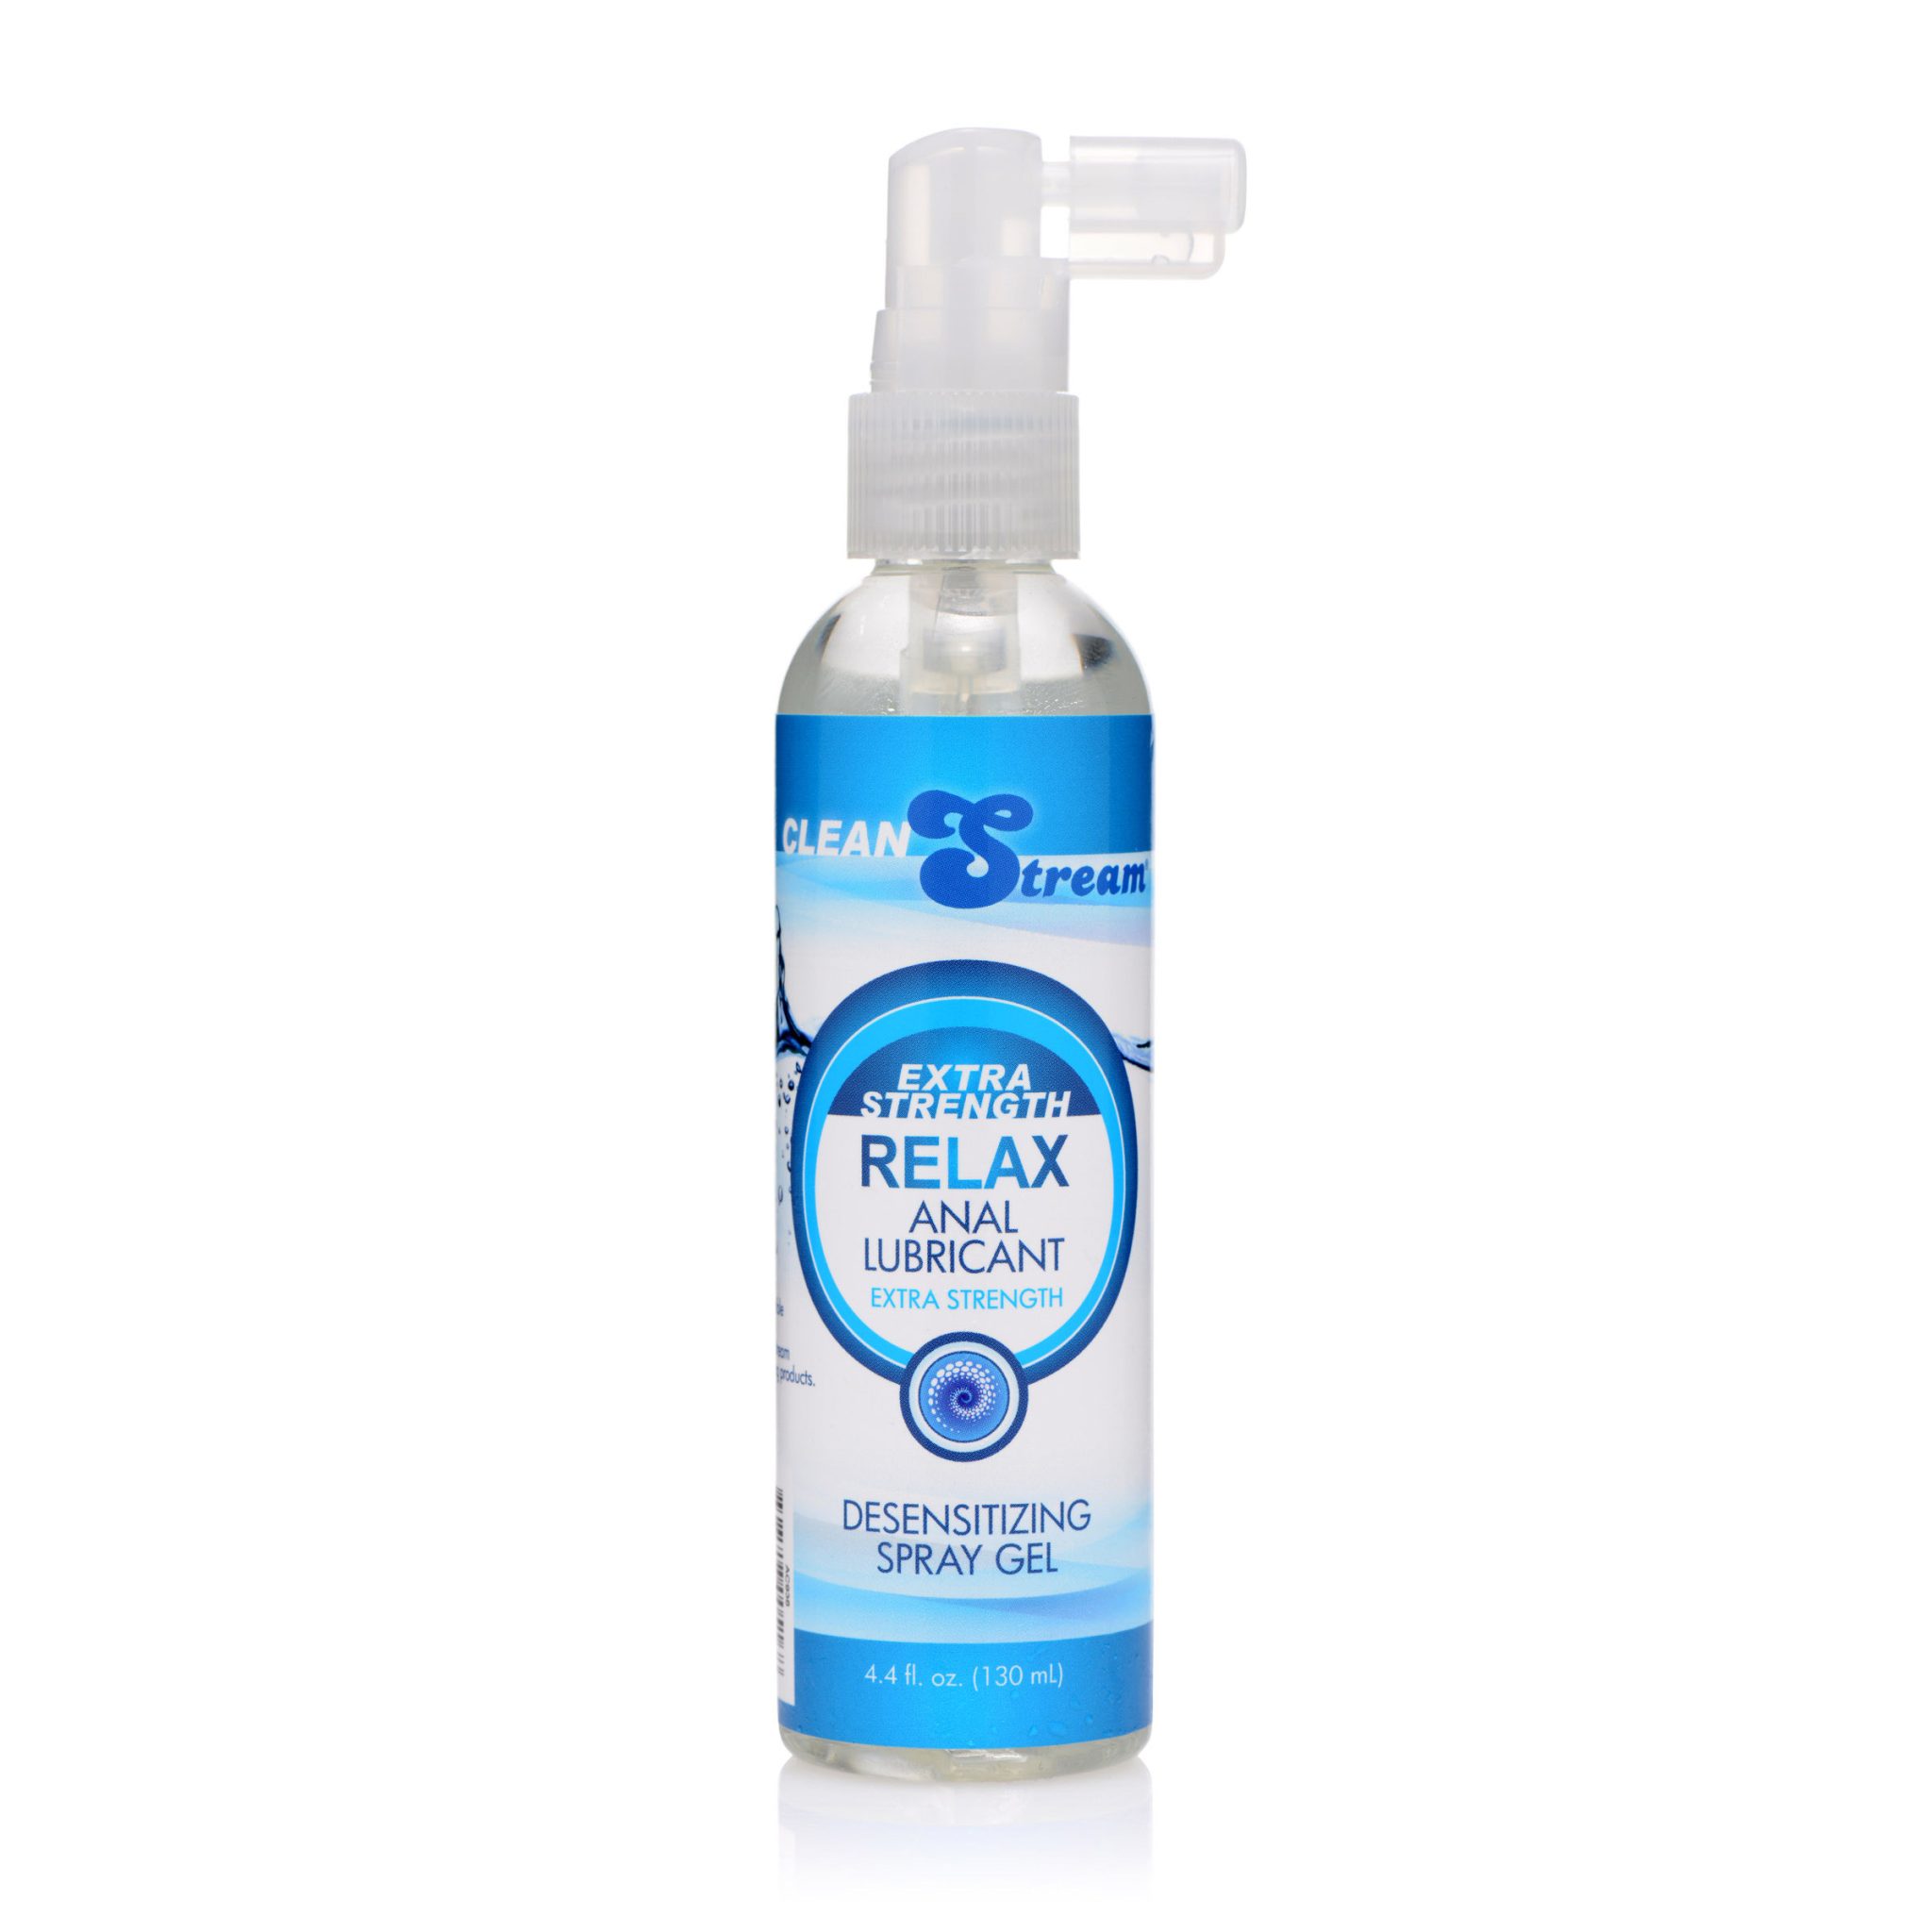 Relax Extra Strength Anal Lube – 4.4 oz